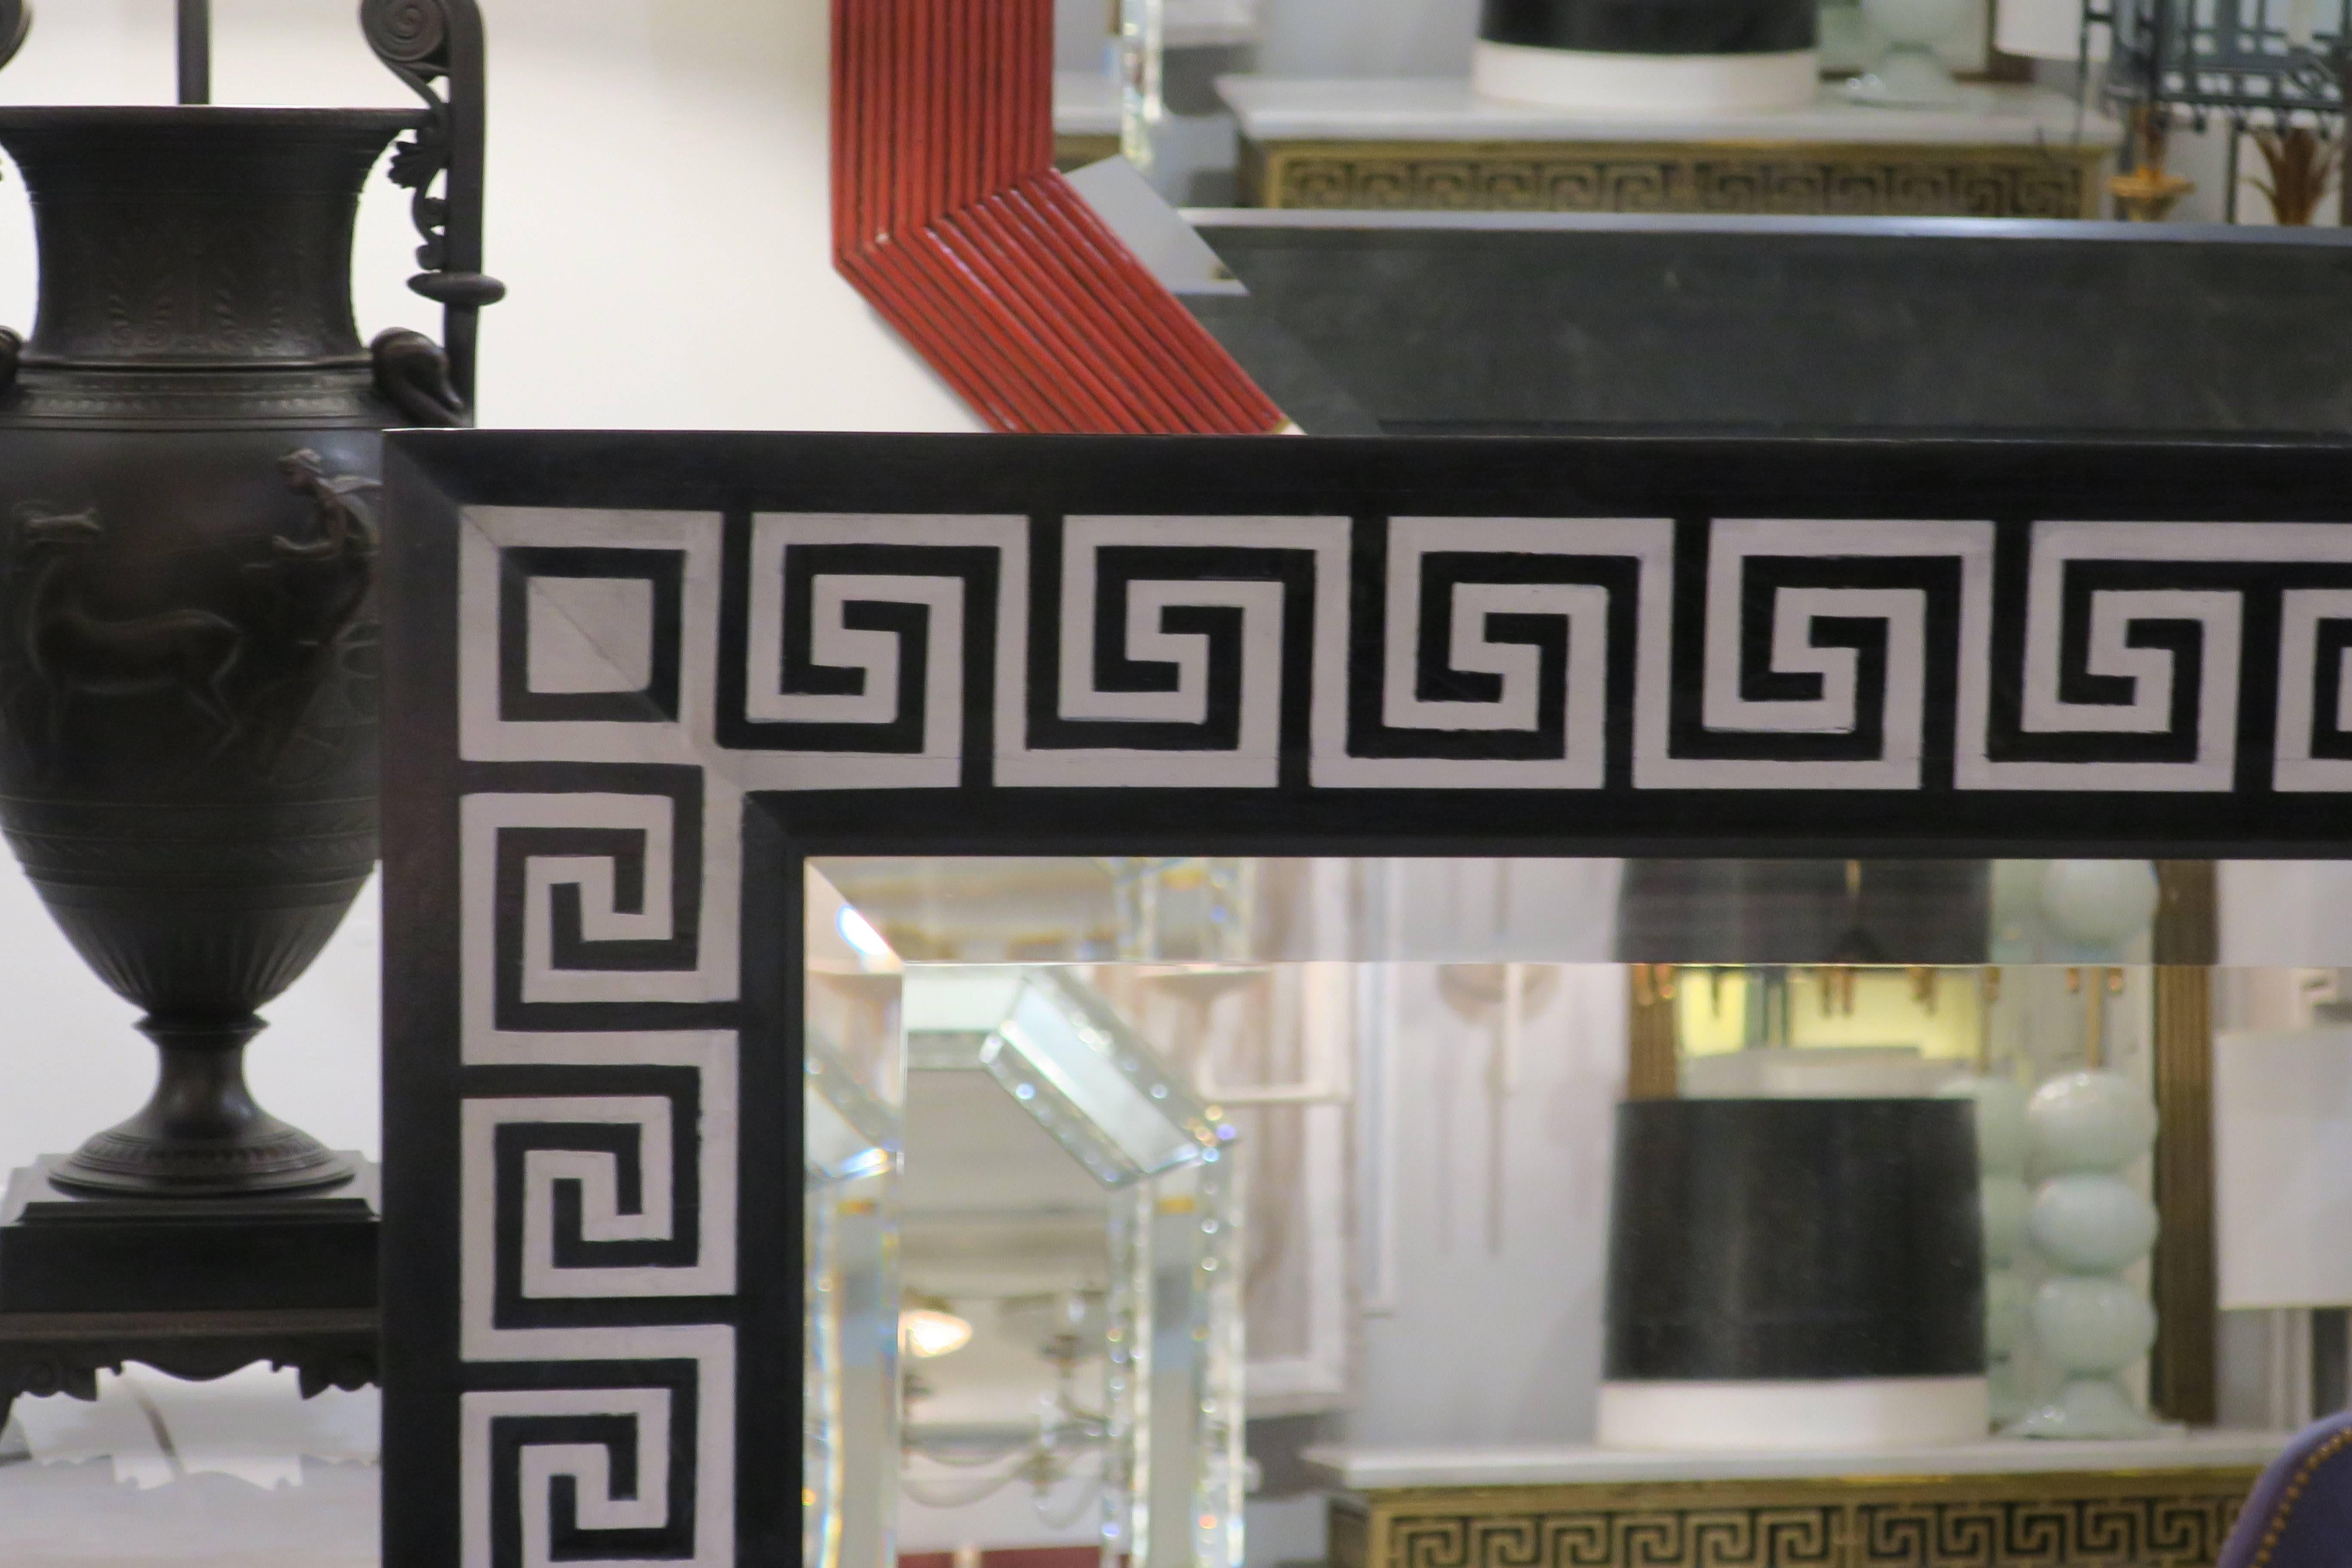 Bespoke hand-decorated mirror with Greek key pattern design along borders.
 